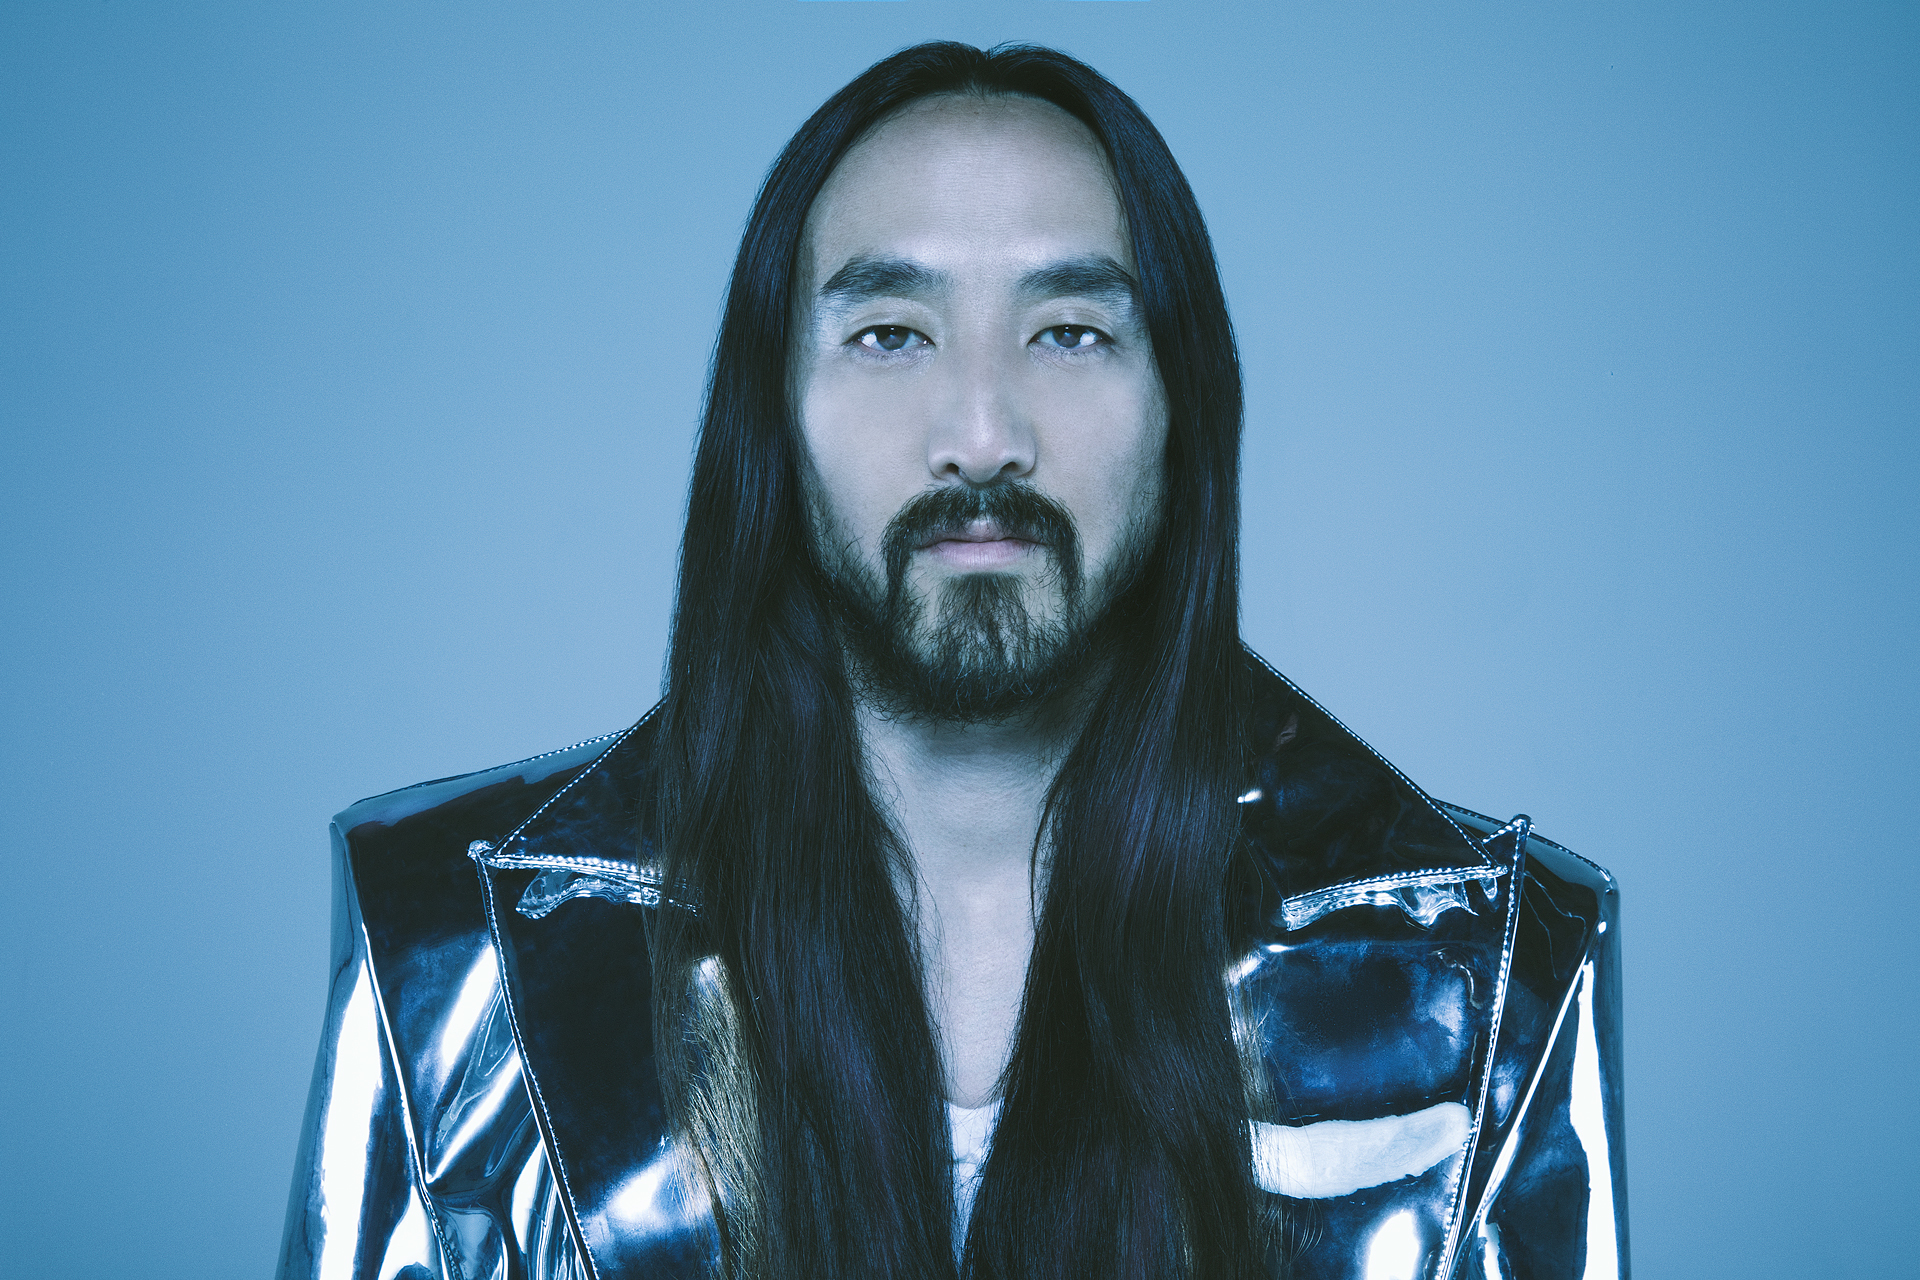 STEVE AOKI RELEASES HIGHLY-ANTICIPATED CROSS-GENRE COLLECTIVE, NEON FUTURE IV